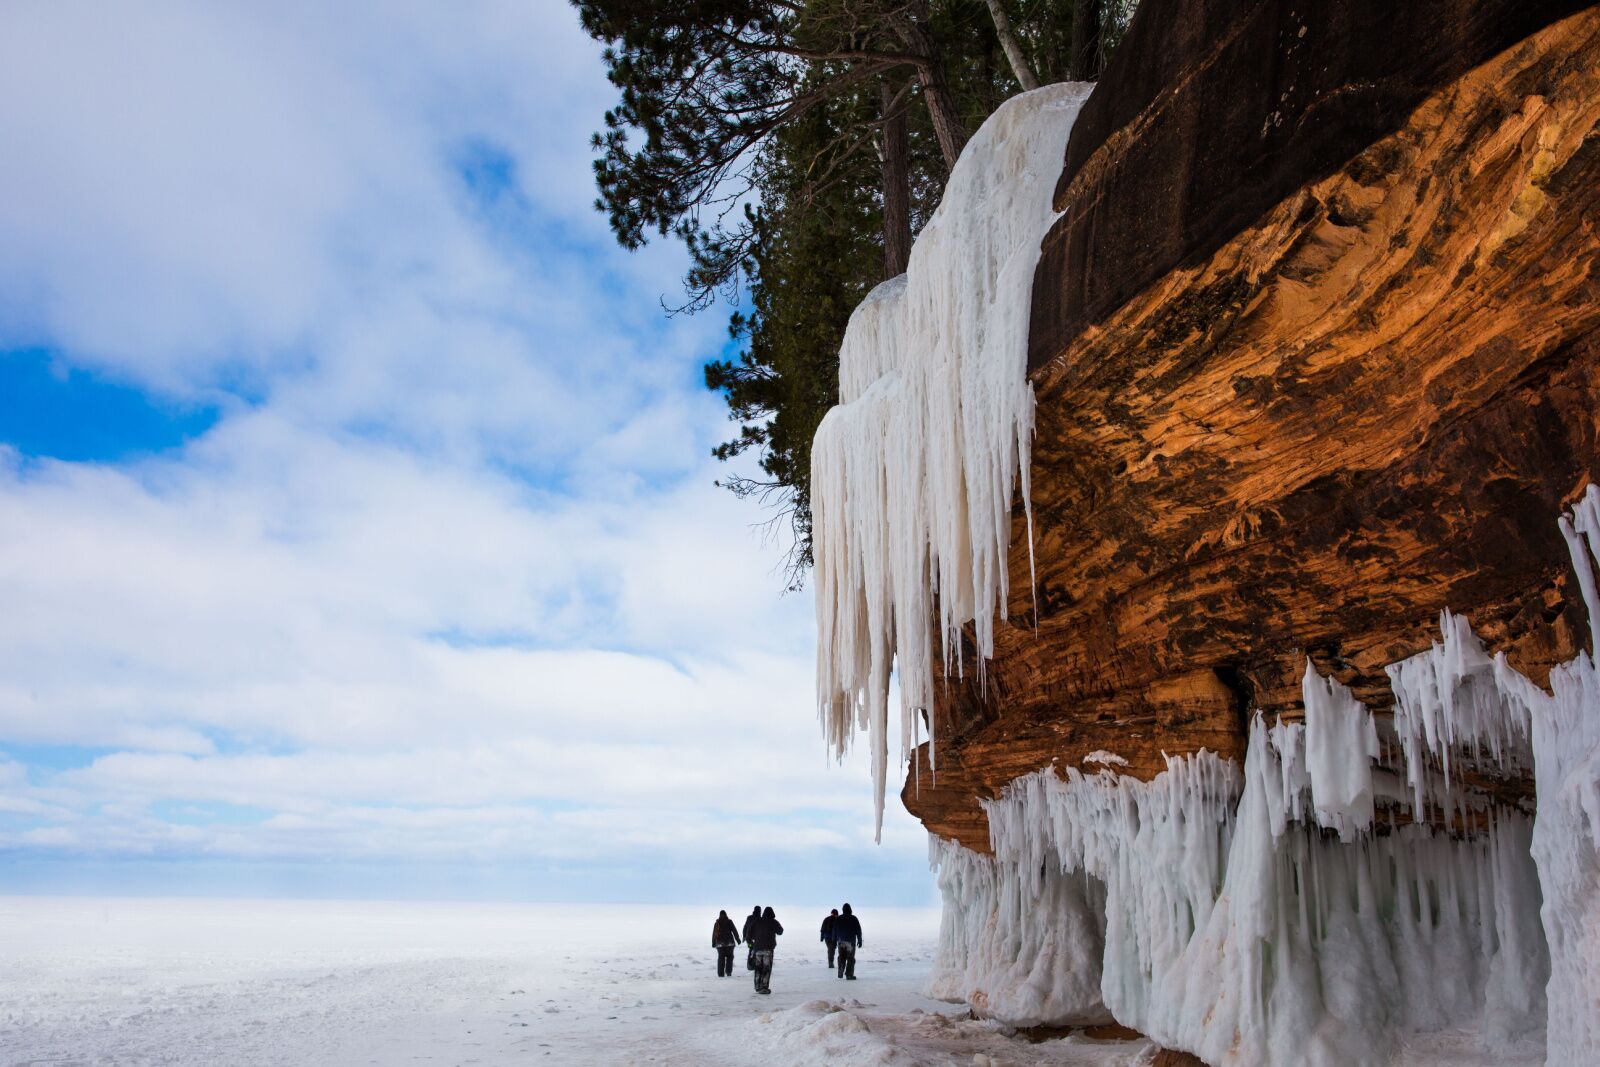 things to do in the midwest in winter - people at wisconsin ice caves with lake on left